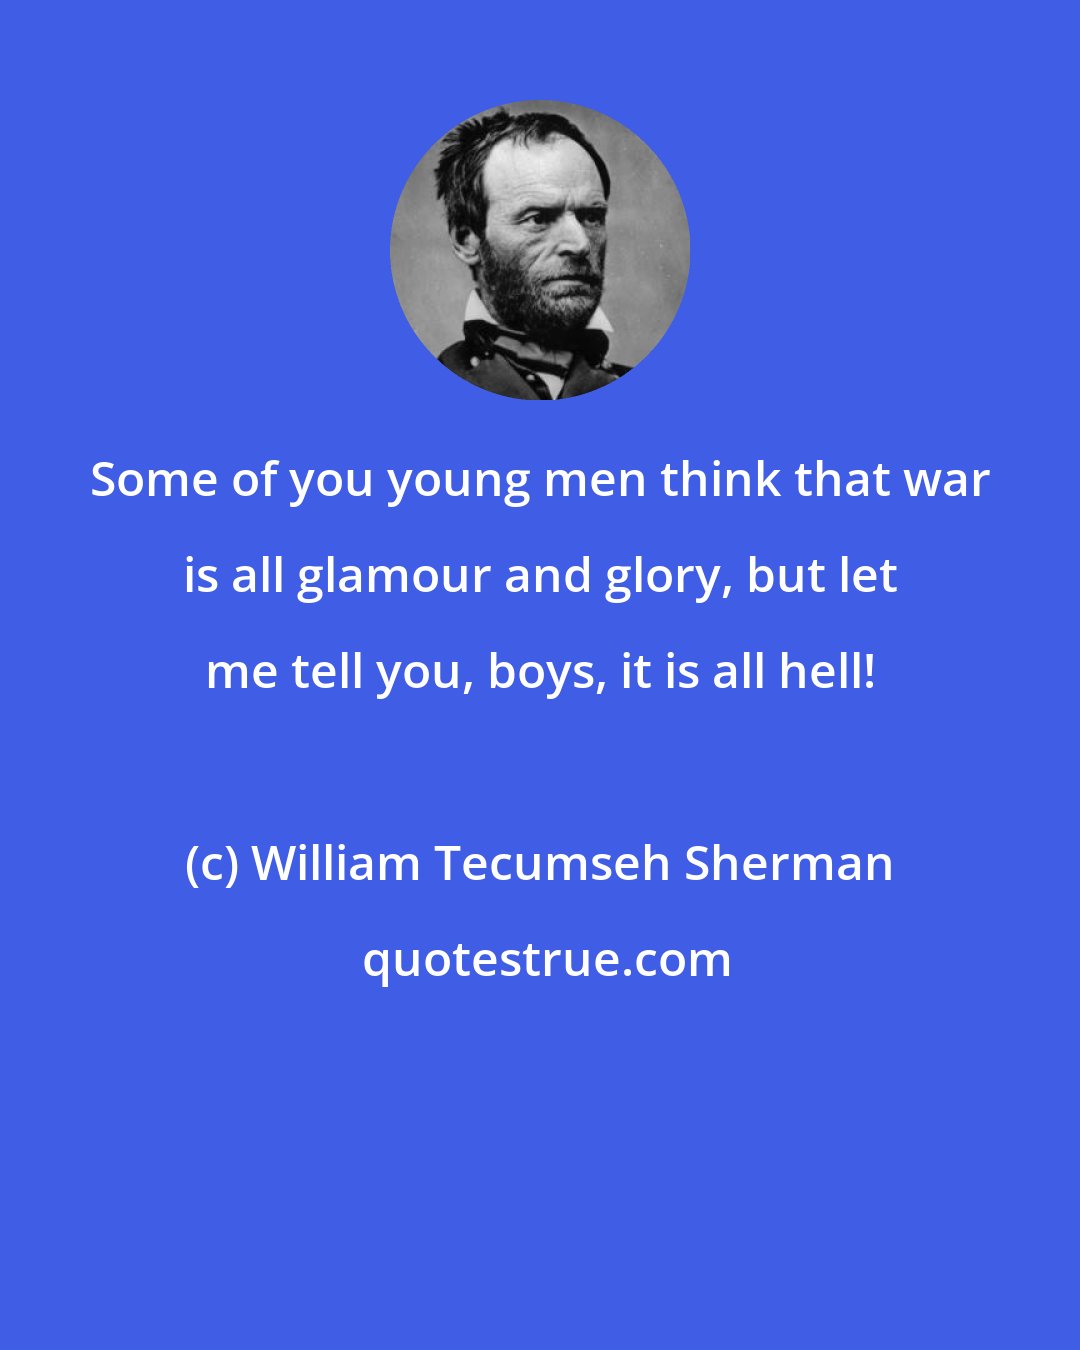 William Tecumseh Sherman: Some of you young men think that war is all glamour and glory, but let me tell you, boys, it is all hell!